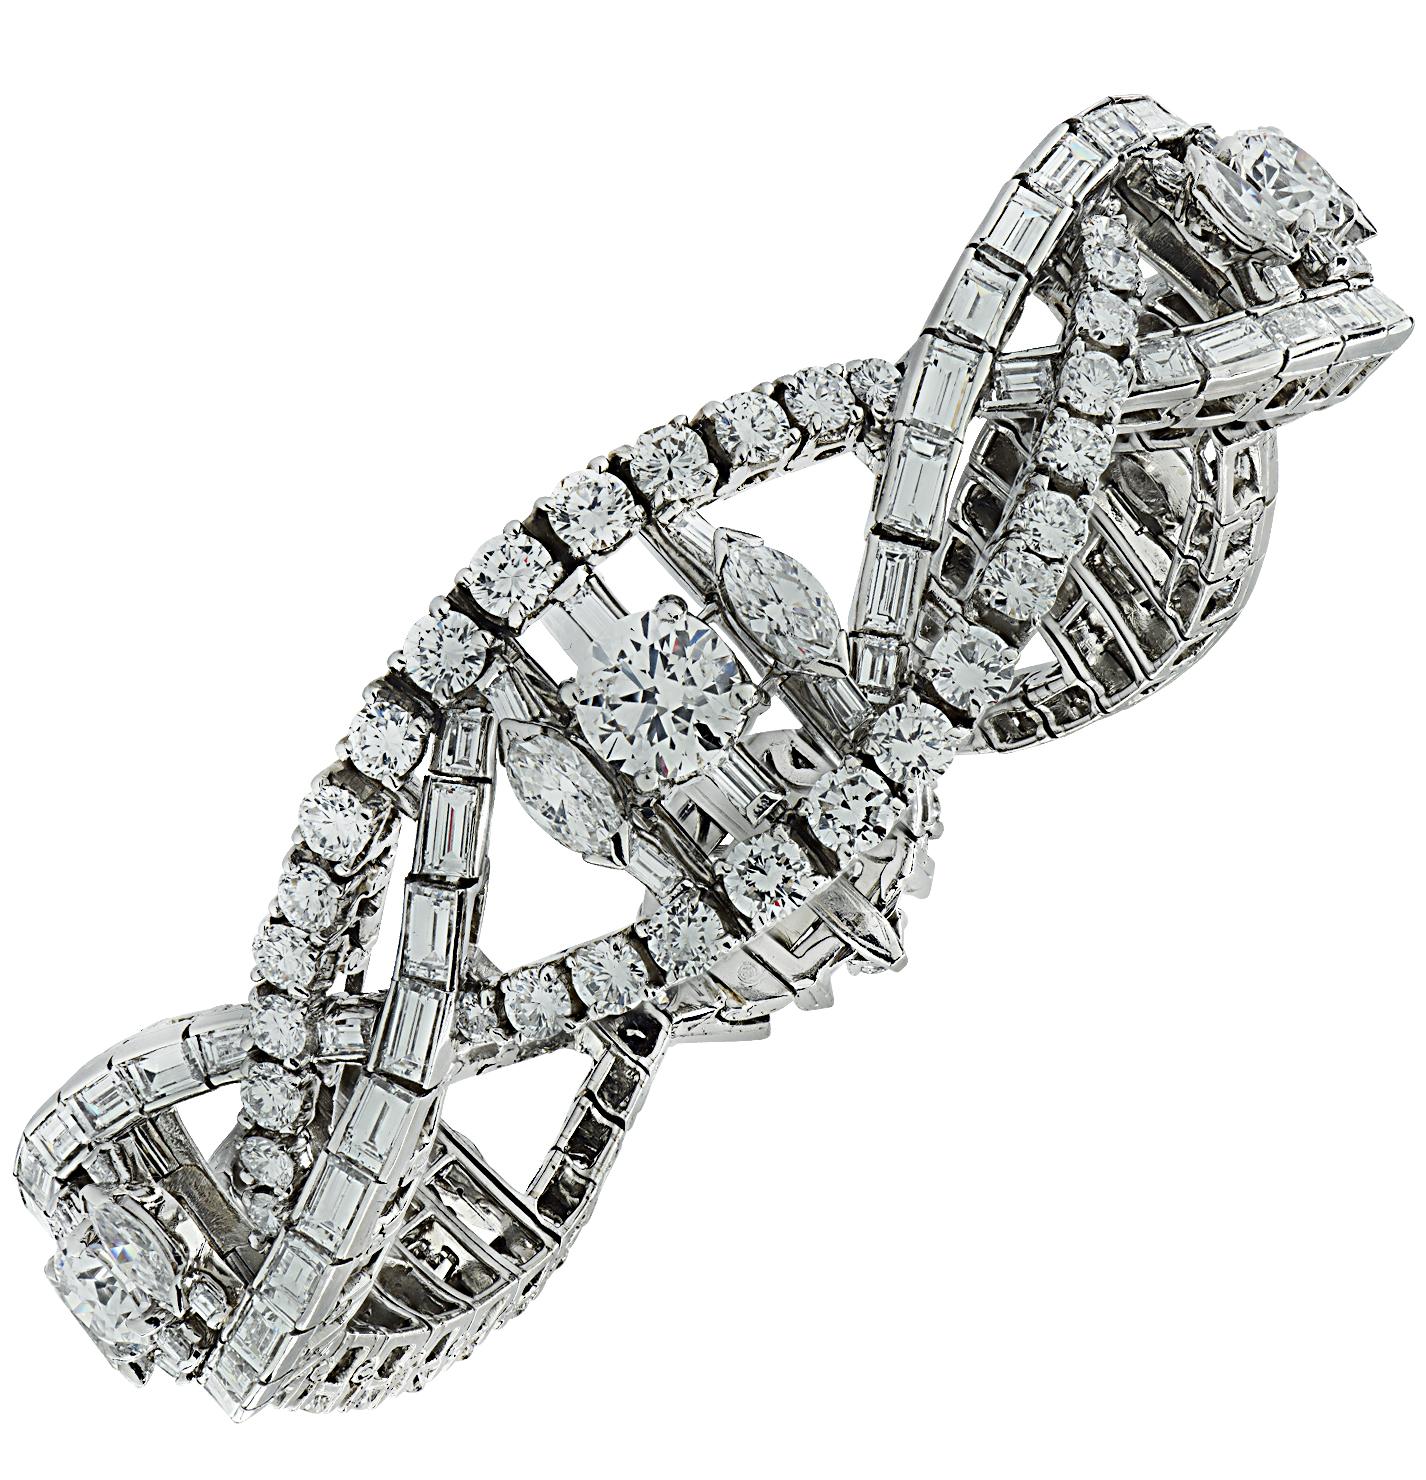 From the legendary house of Oscar Heyman, this exquisite bracelet, is expertly crafted in fine platinum in 1975, showcases 18 carats of diamonds, set in a stunning twist design. This spectacular bracelet features 74 dazzling round brilliant cut